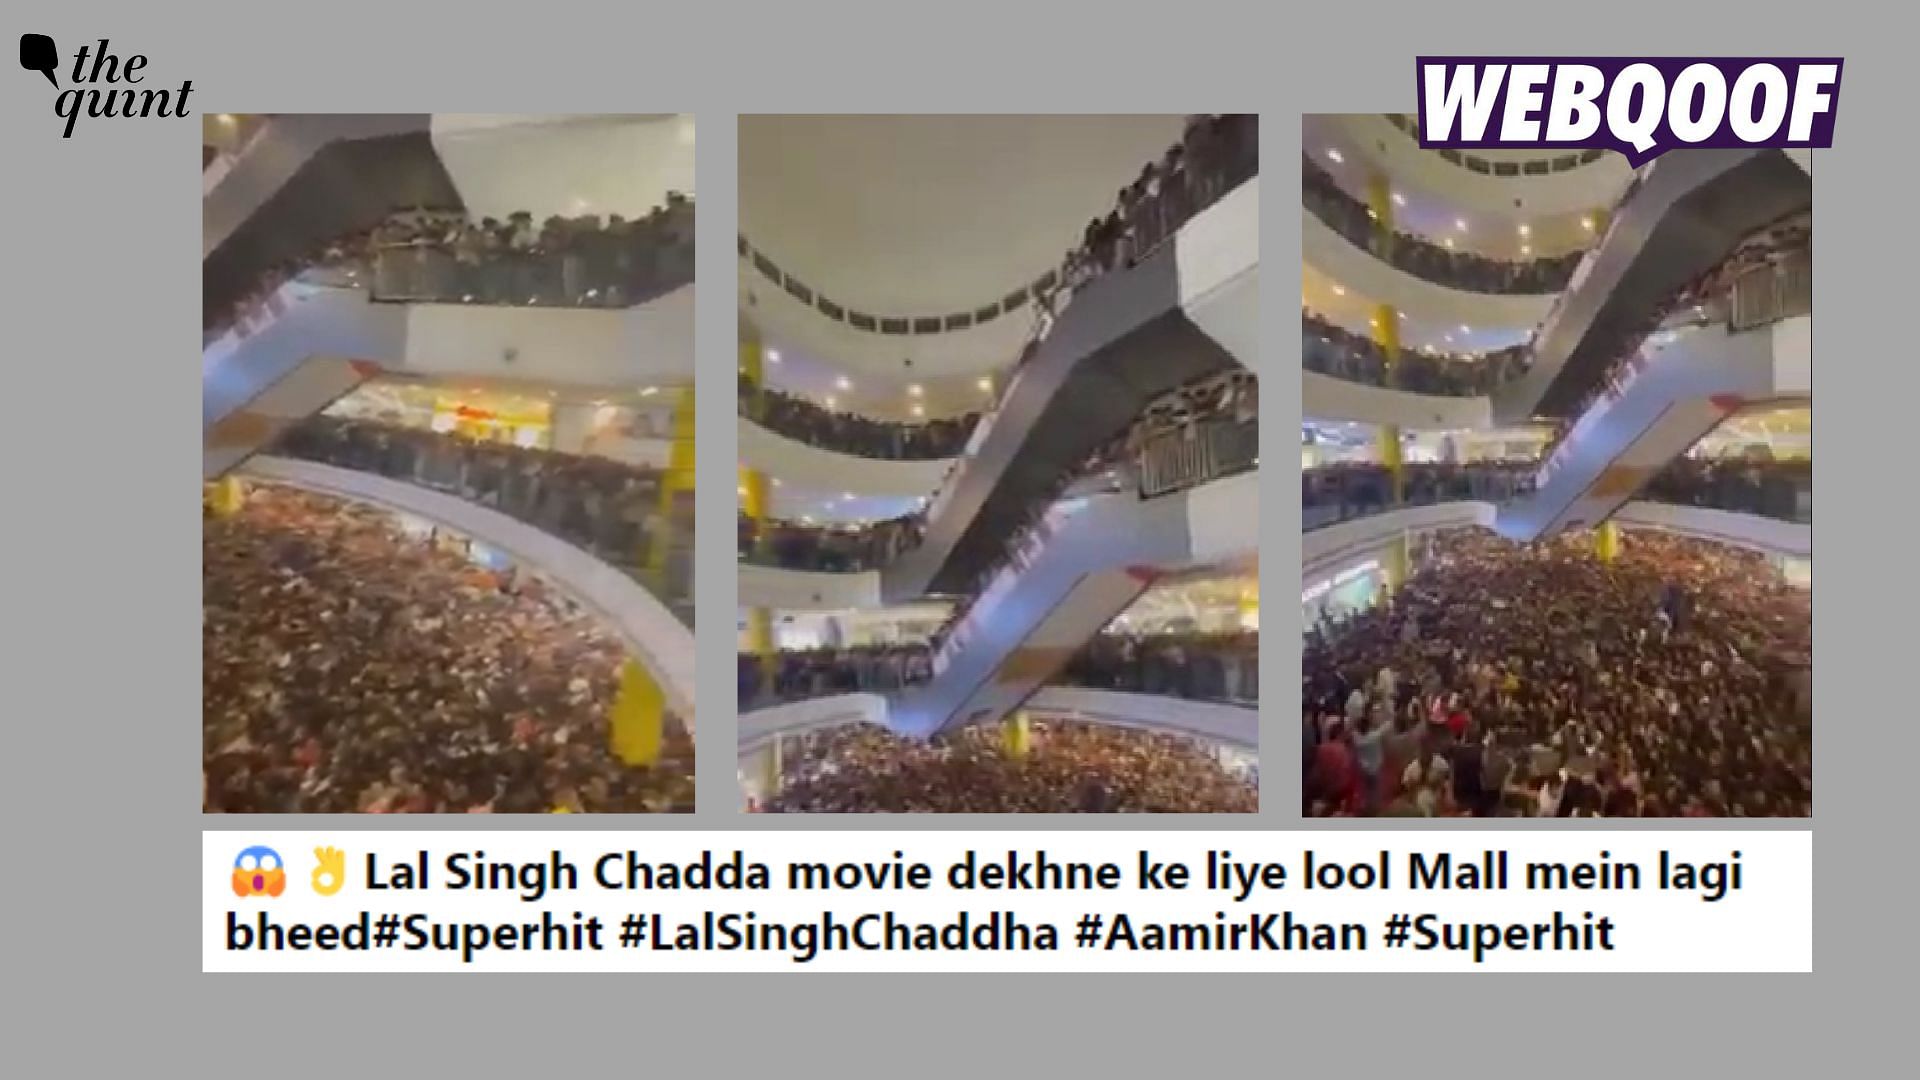 <div class="paragraphs"><p>The claim suggests that an overwhelming crowd gathered at  Lulu Mall in Lucknow to watch shows of <em>Laal Singh Chaddha.</em>&nbsp;</p></div>